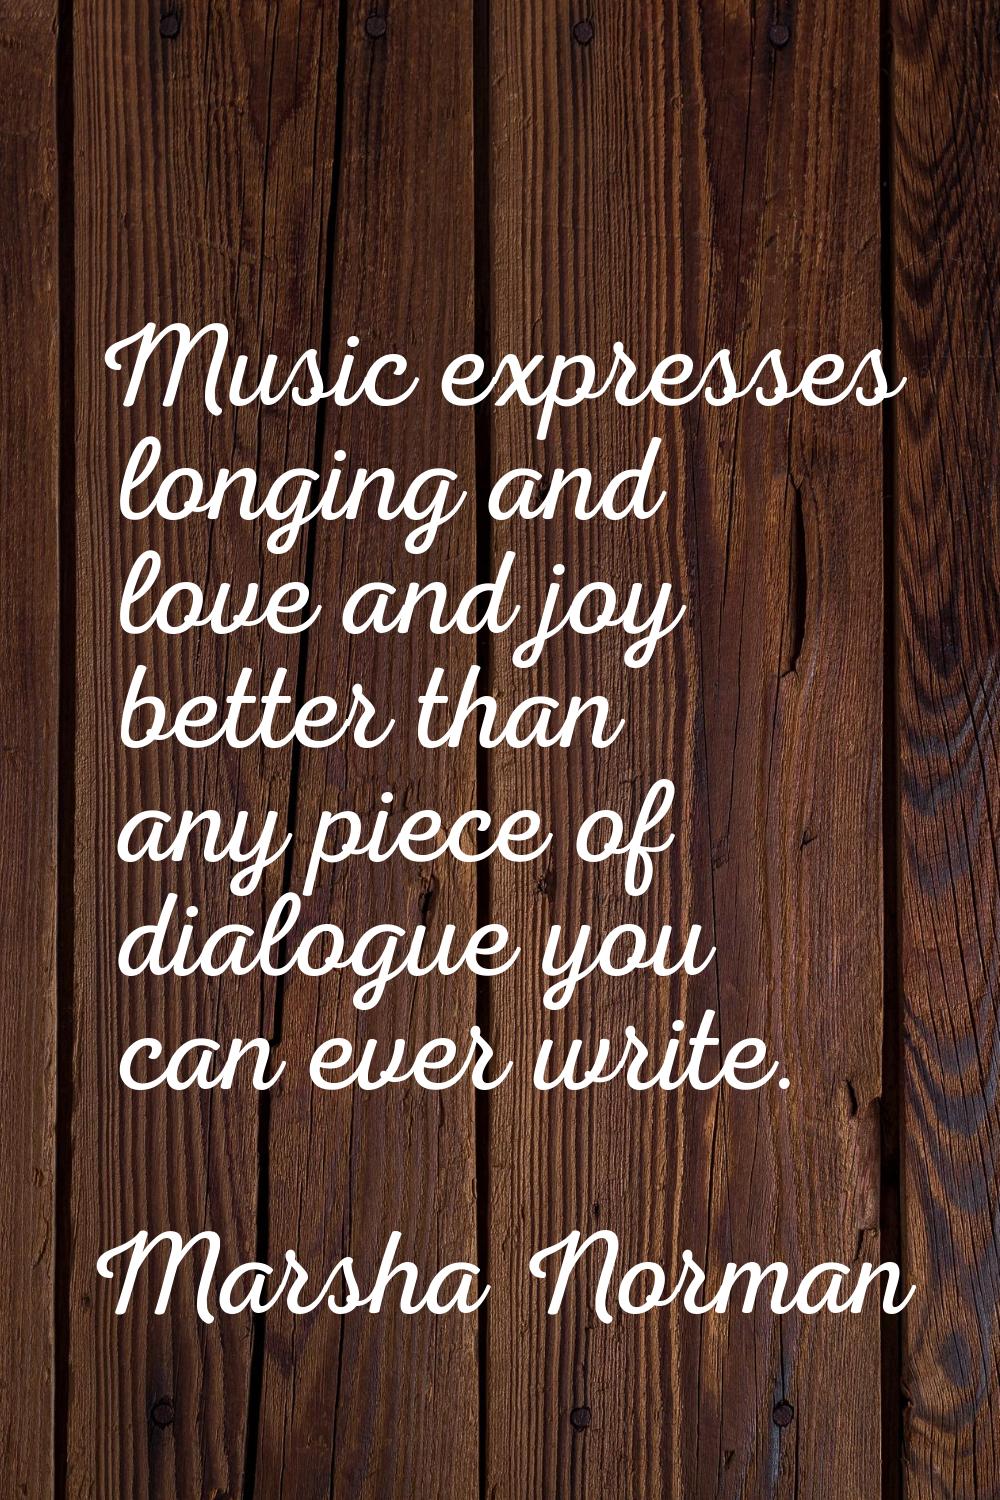 Music expresses longing and love and joy better than any piece of dialogue you can ever write.